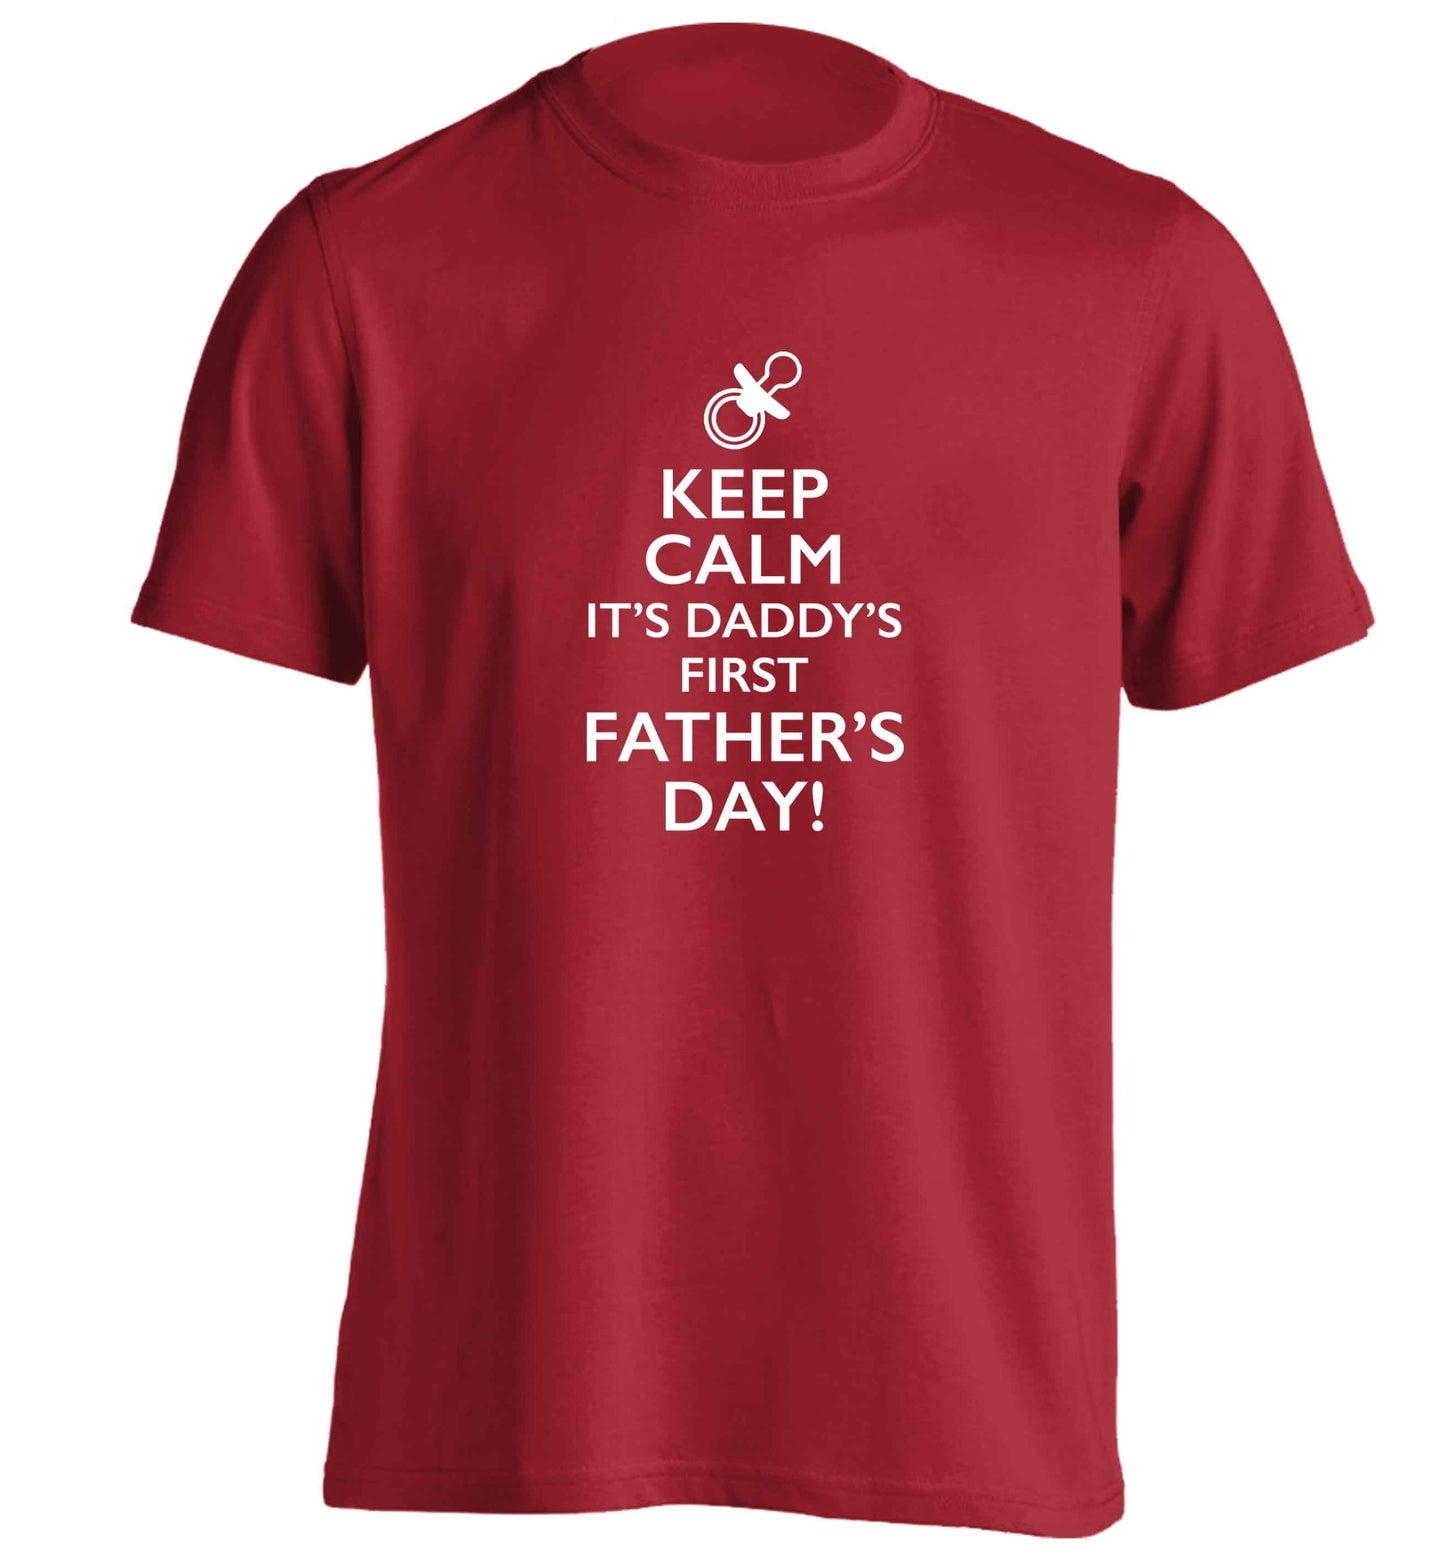 Keep calm it's daddys first father's day adults unisex red Tshirt 2XL